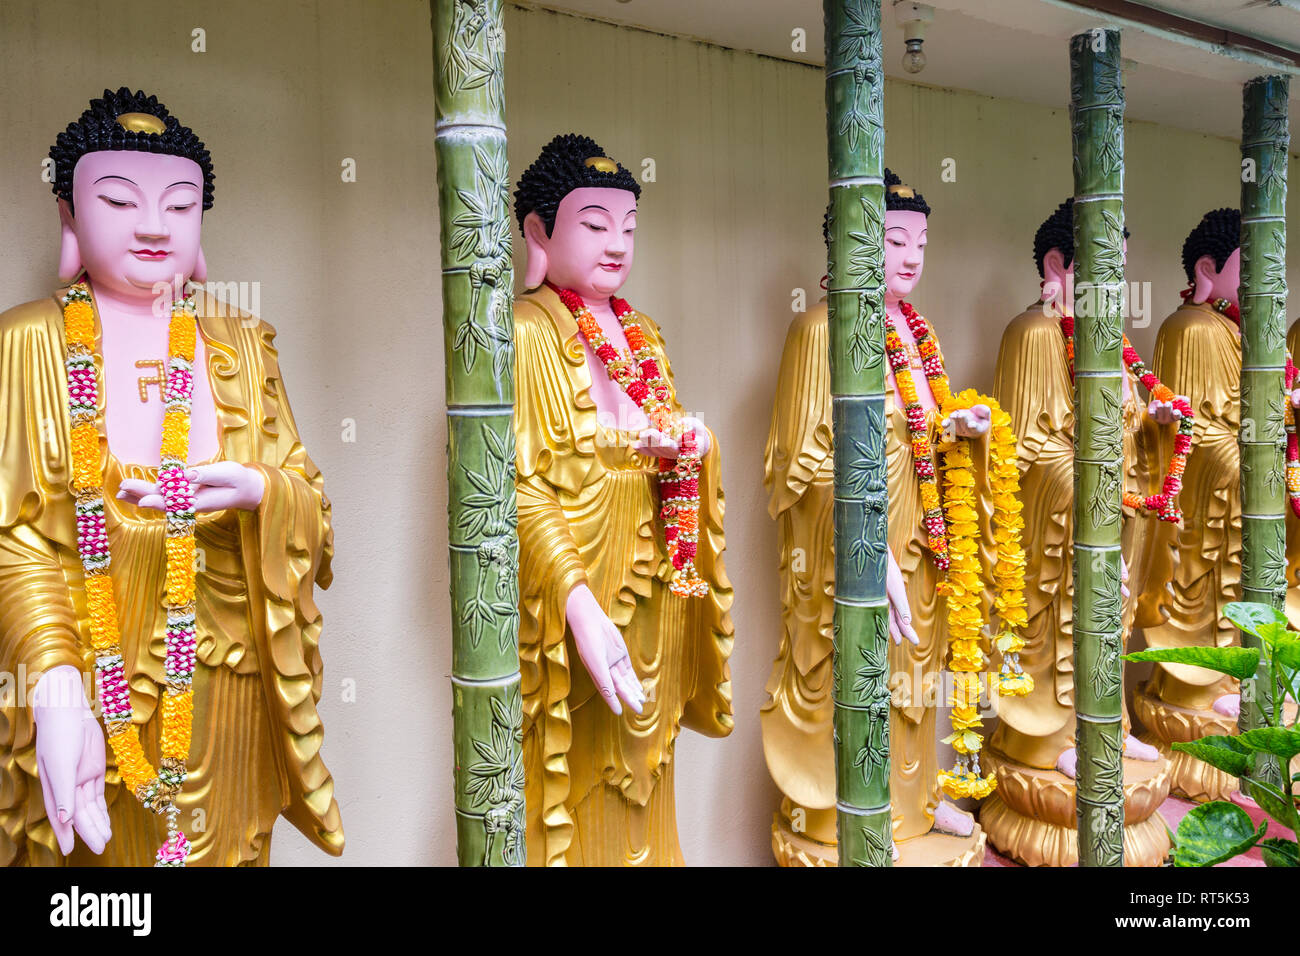 Buddhist Statues in Wall Surrounding garden of Kek Lok Si Buddhist Temple, George Town, Penang, Malaysia. Stock Photo